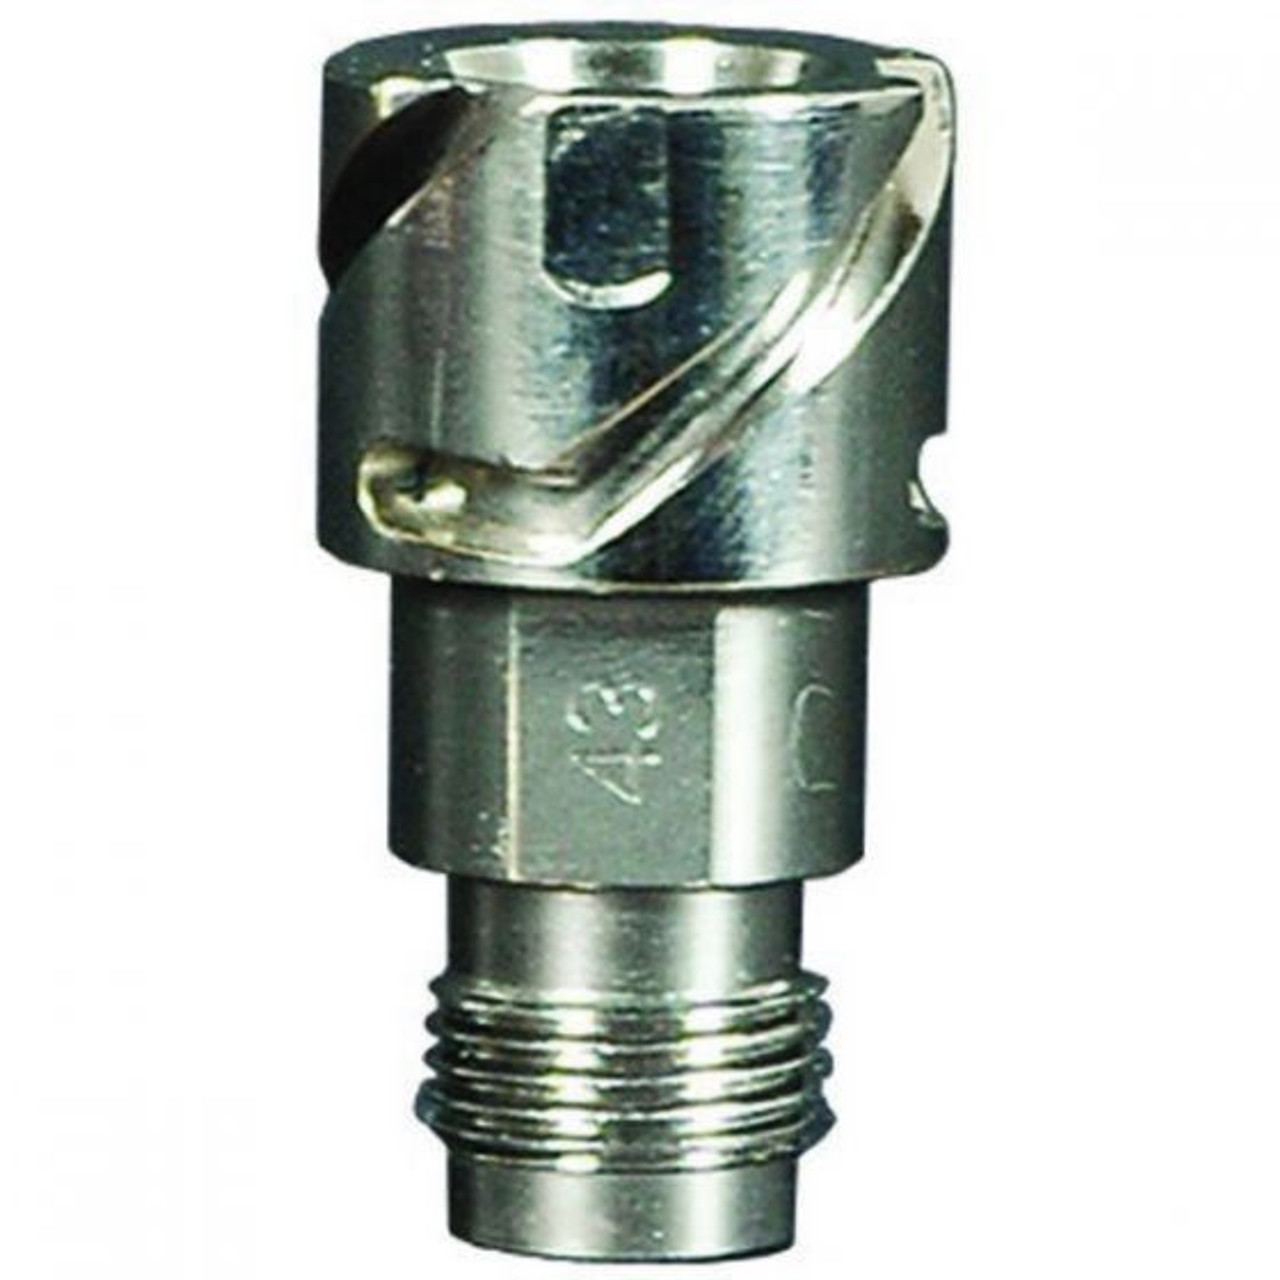 DevilBiss? DeKups? DPC-43 Adapter, Use With: Disposable Cup System with DeVilbiss, Binks & Sharpe Spray Guns